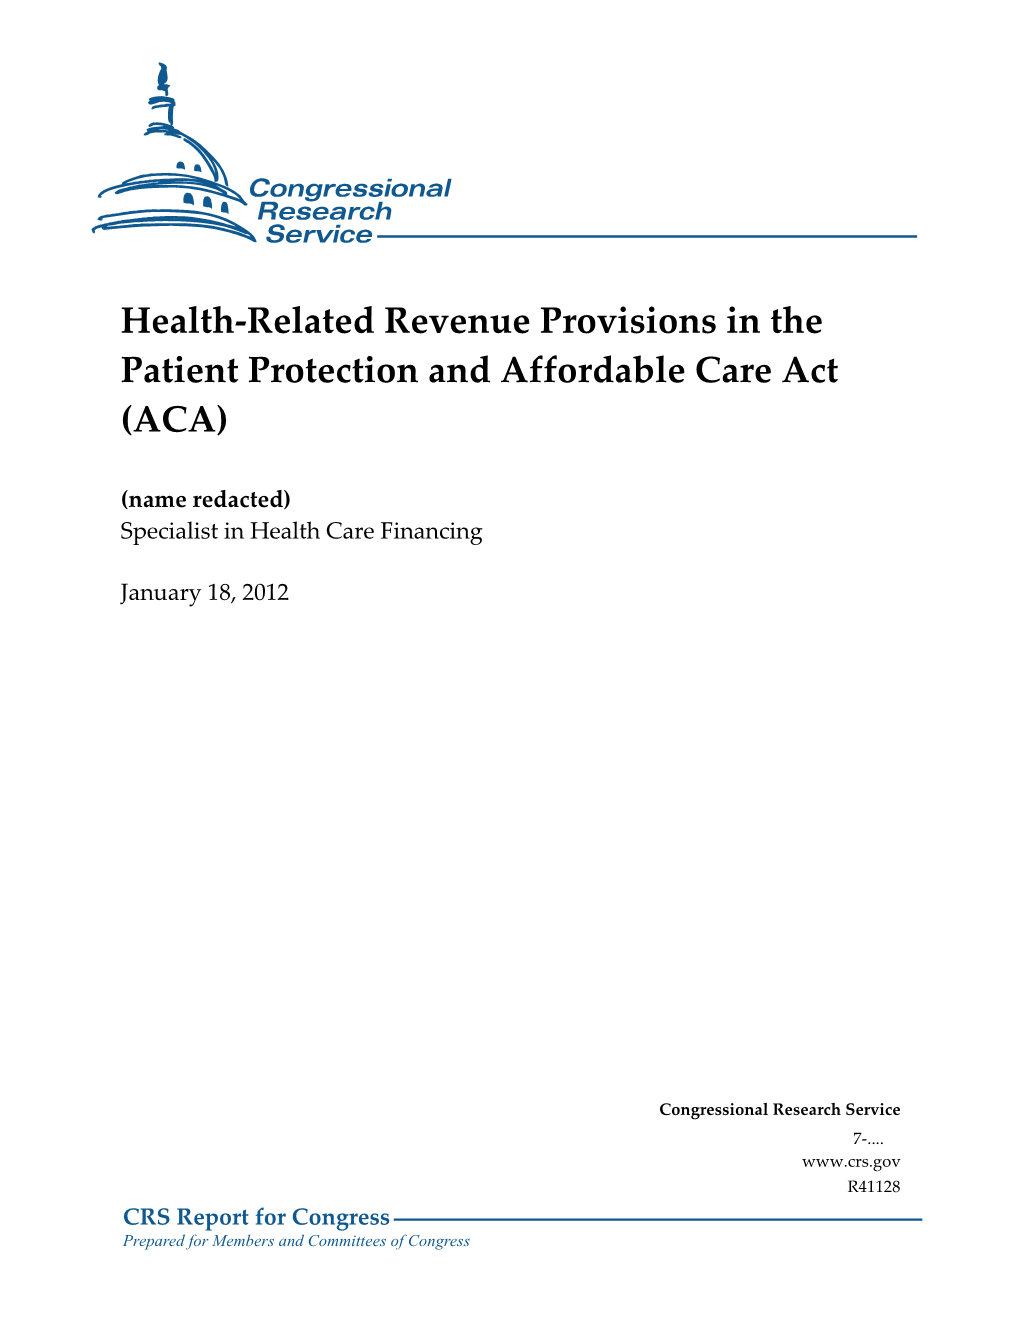 Health-Related Revenue Provisions in the Patient Protection and Affordable Care Act (ACA)